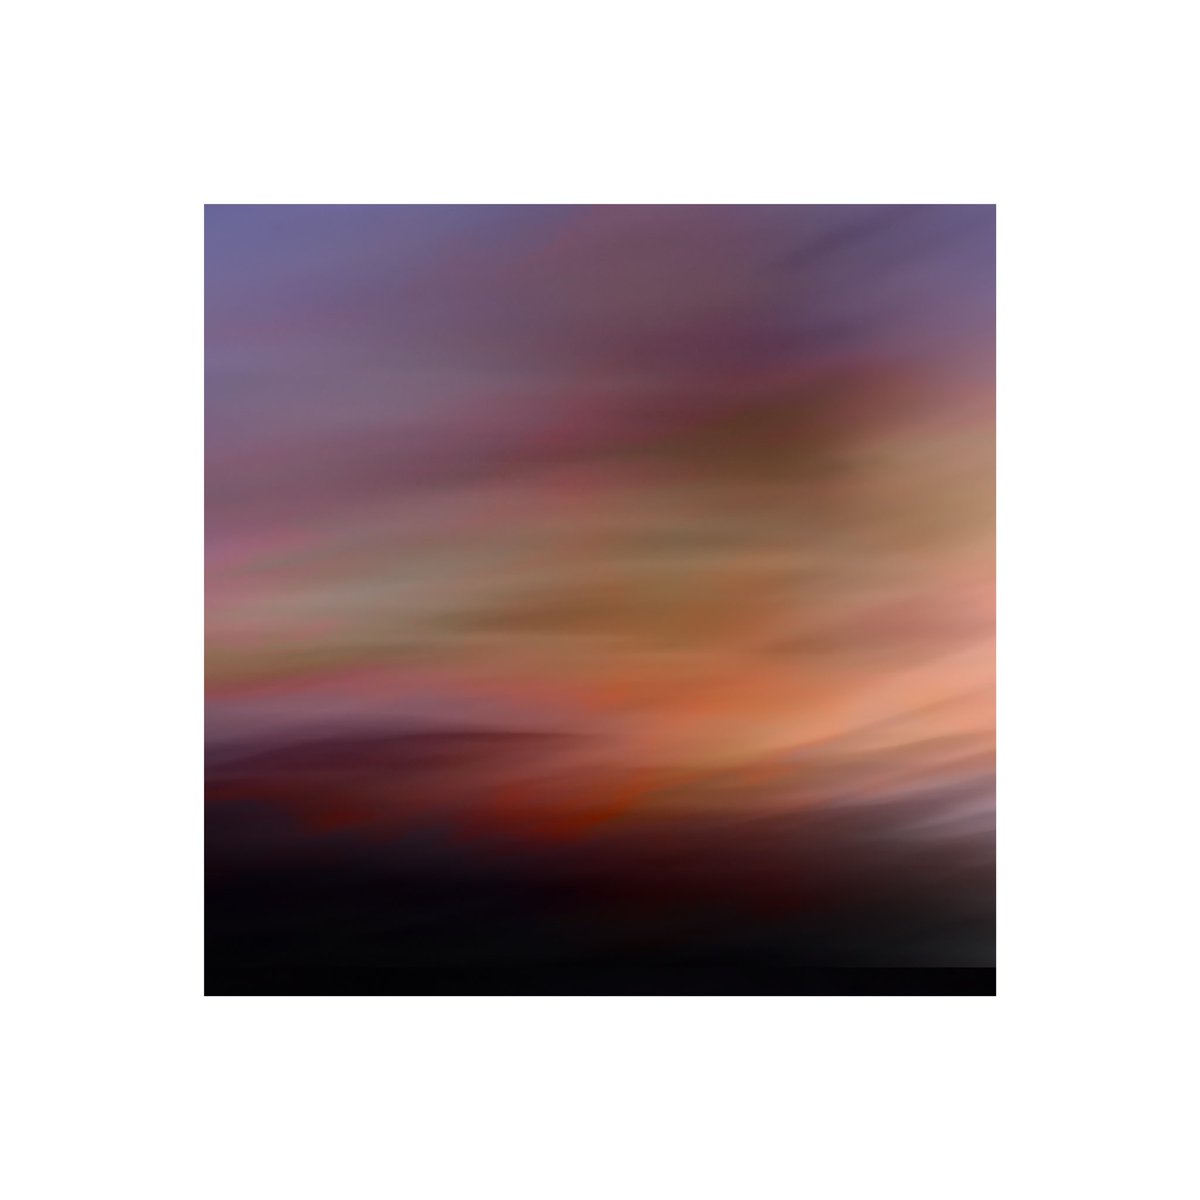 day 175 365 days of icm photography 
 #icmphotography #icm #intentionalcameramovement #abstractphotography #abstract #icmphoto #icmphotomag #impressionistphotography #bluronpurpose #camerapainting #fieldrecording #audiophotography #365in2023